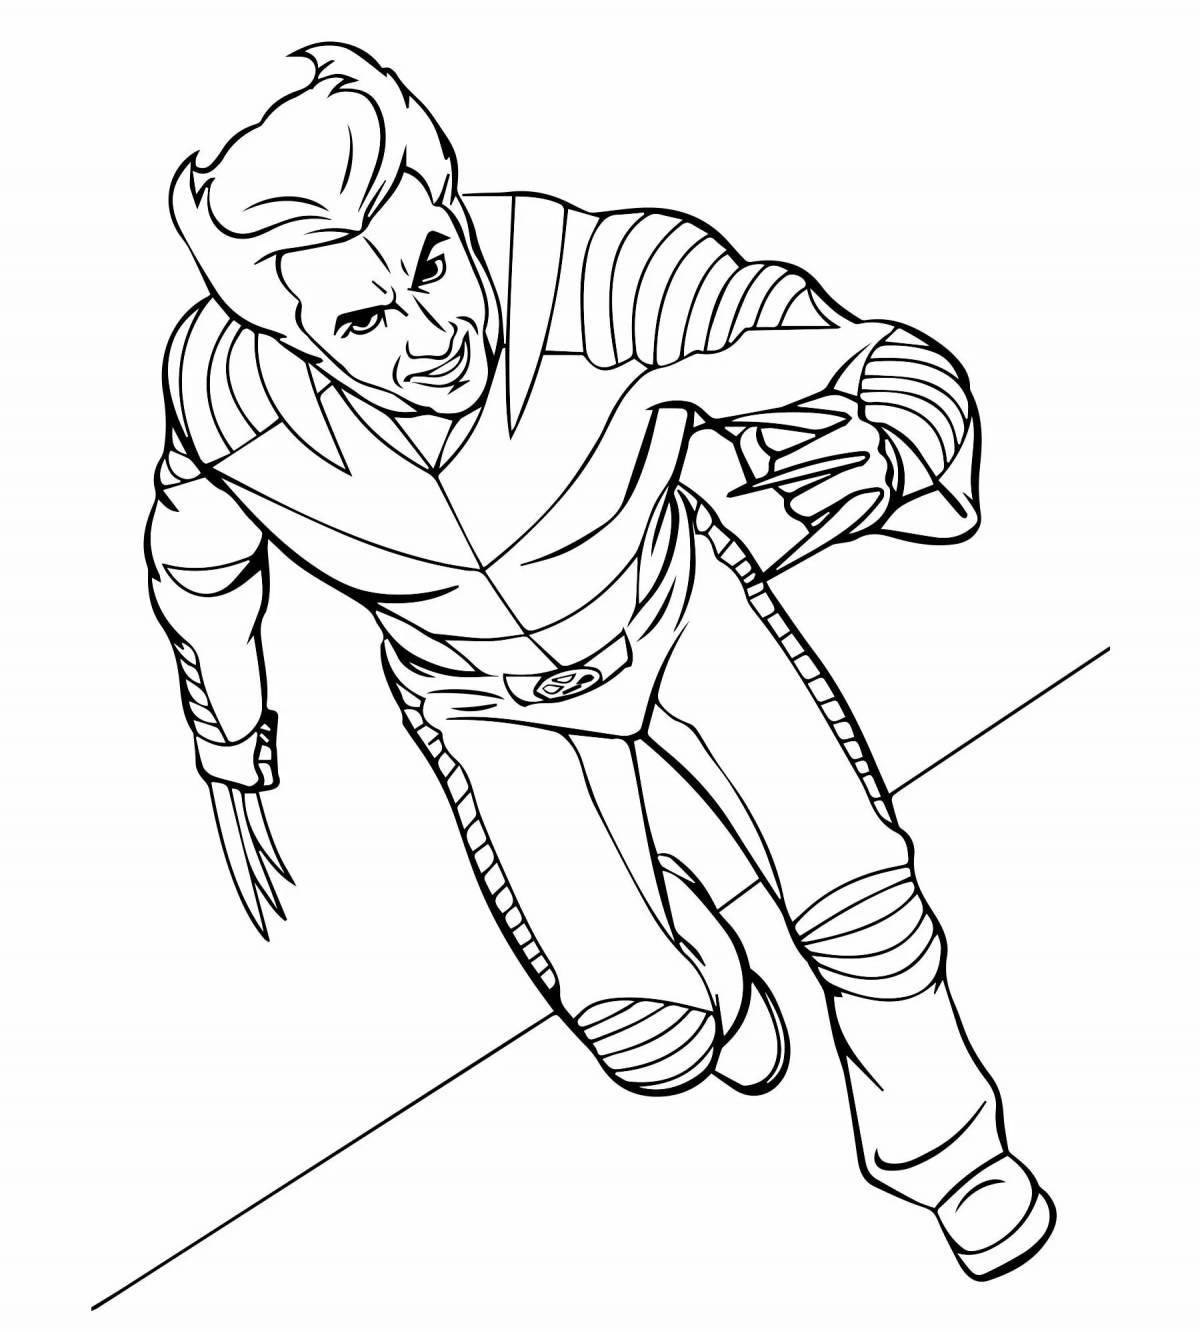 Fun coloring wolverine for kids